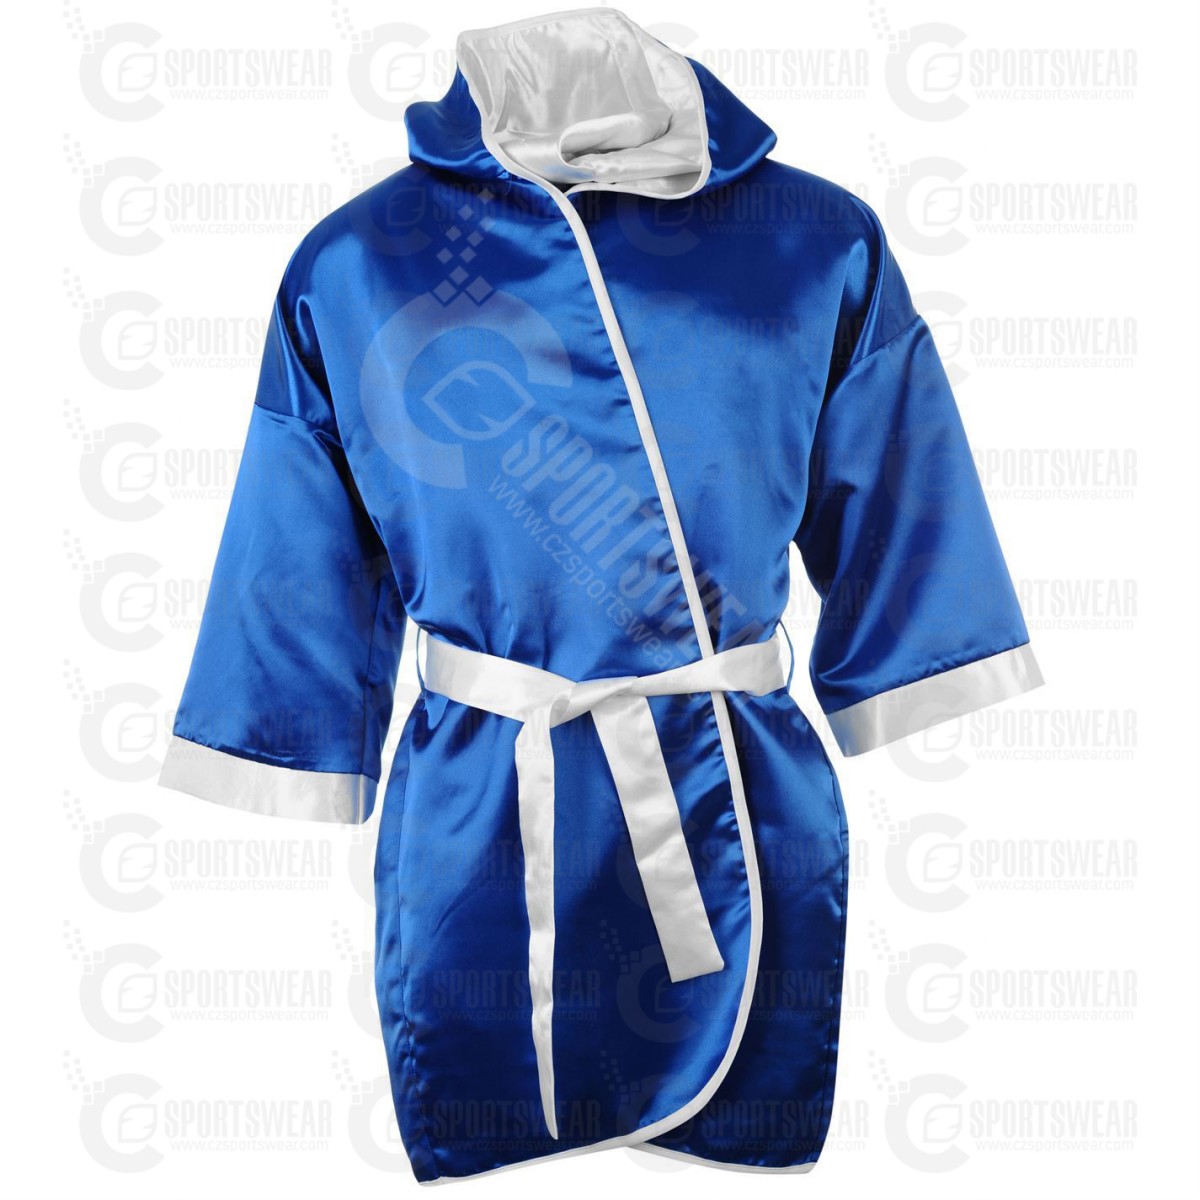 Get Your Custom Made Boxing Robe, Customized Boxing Robe with Your Logo ...